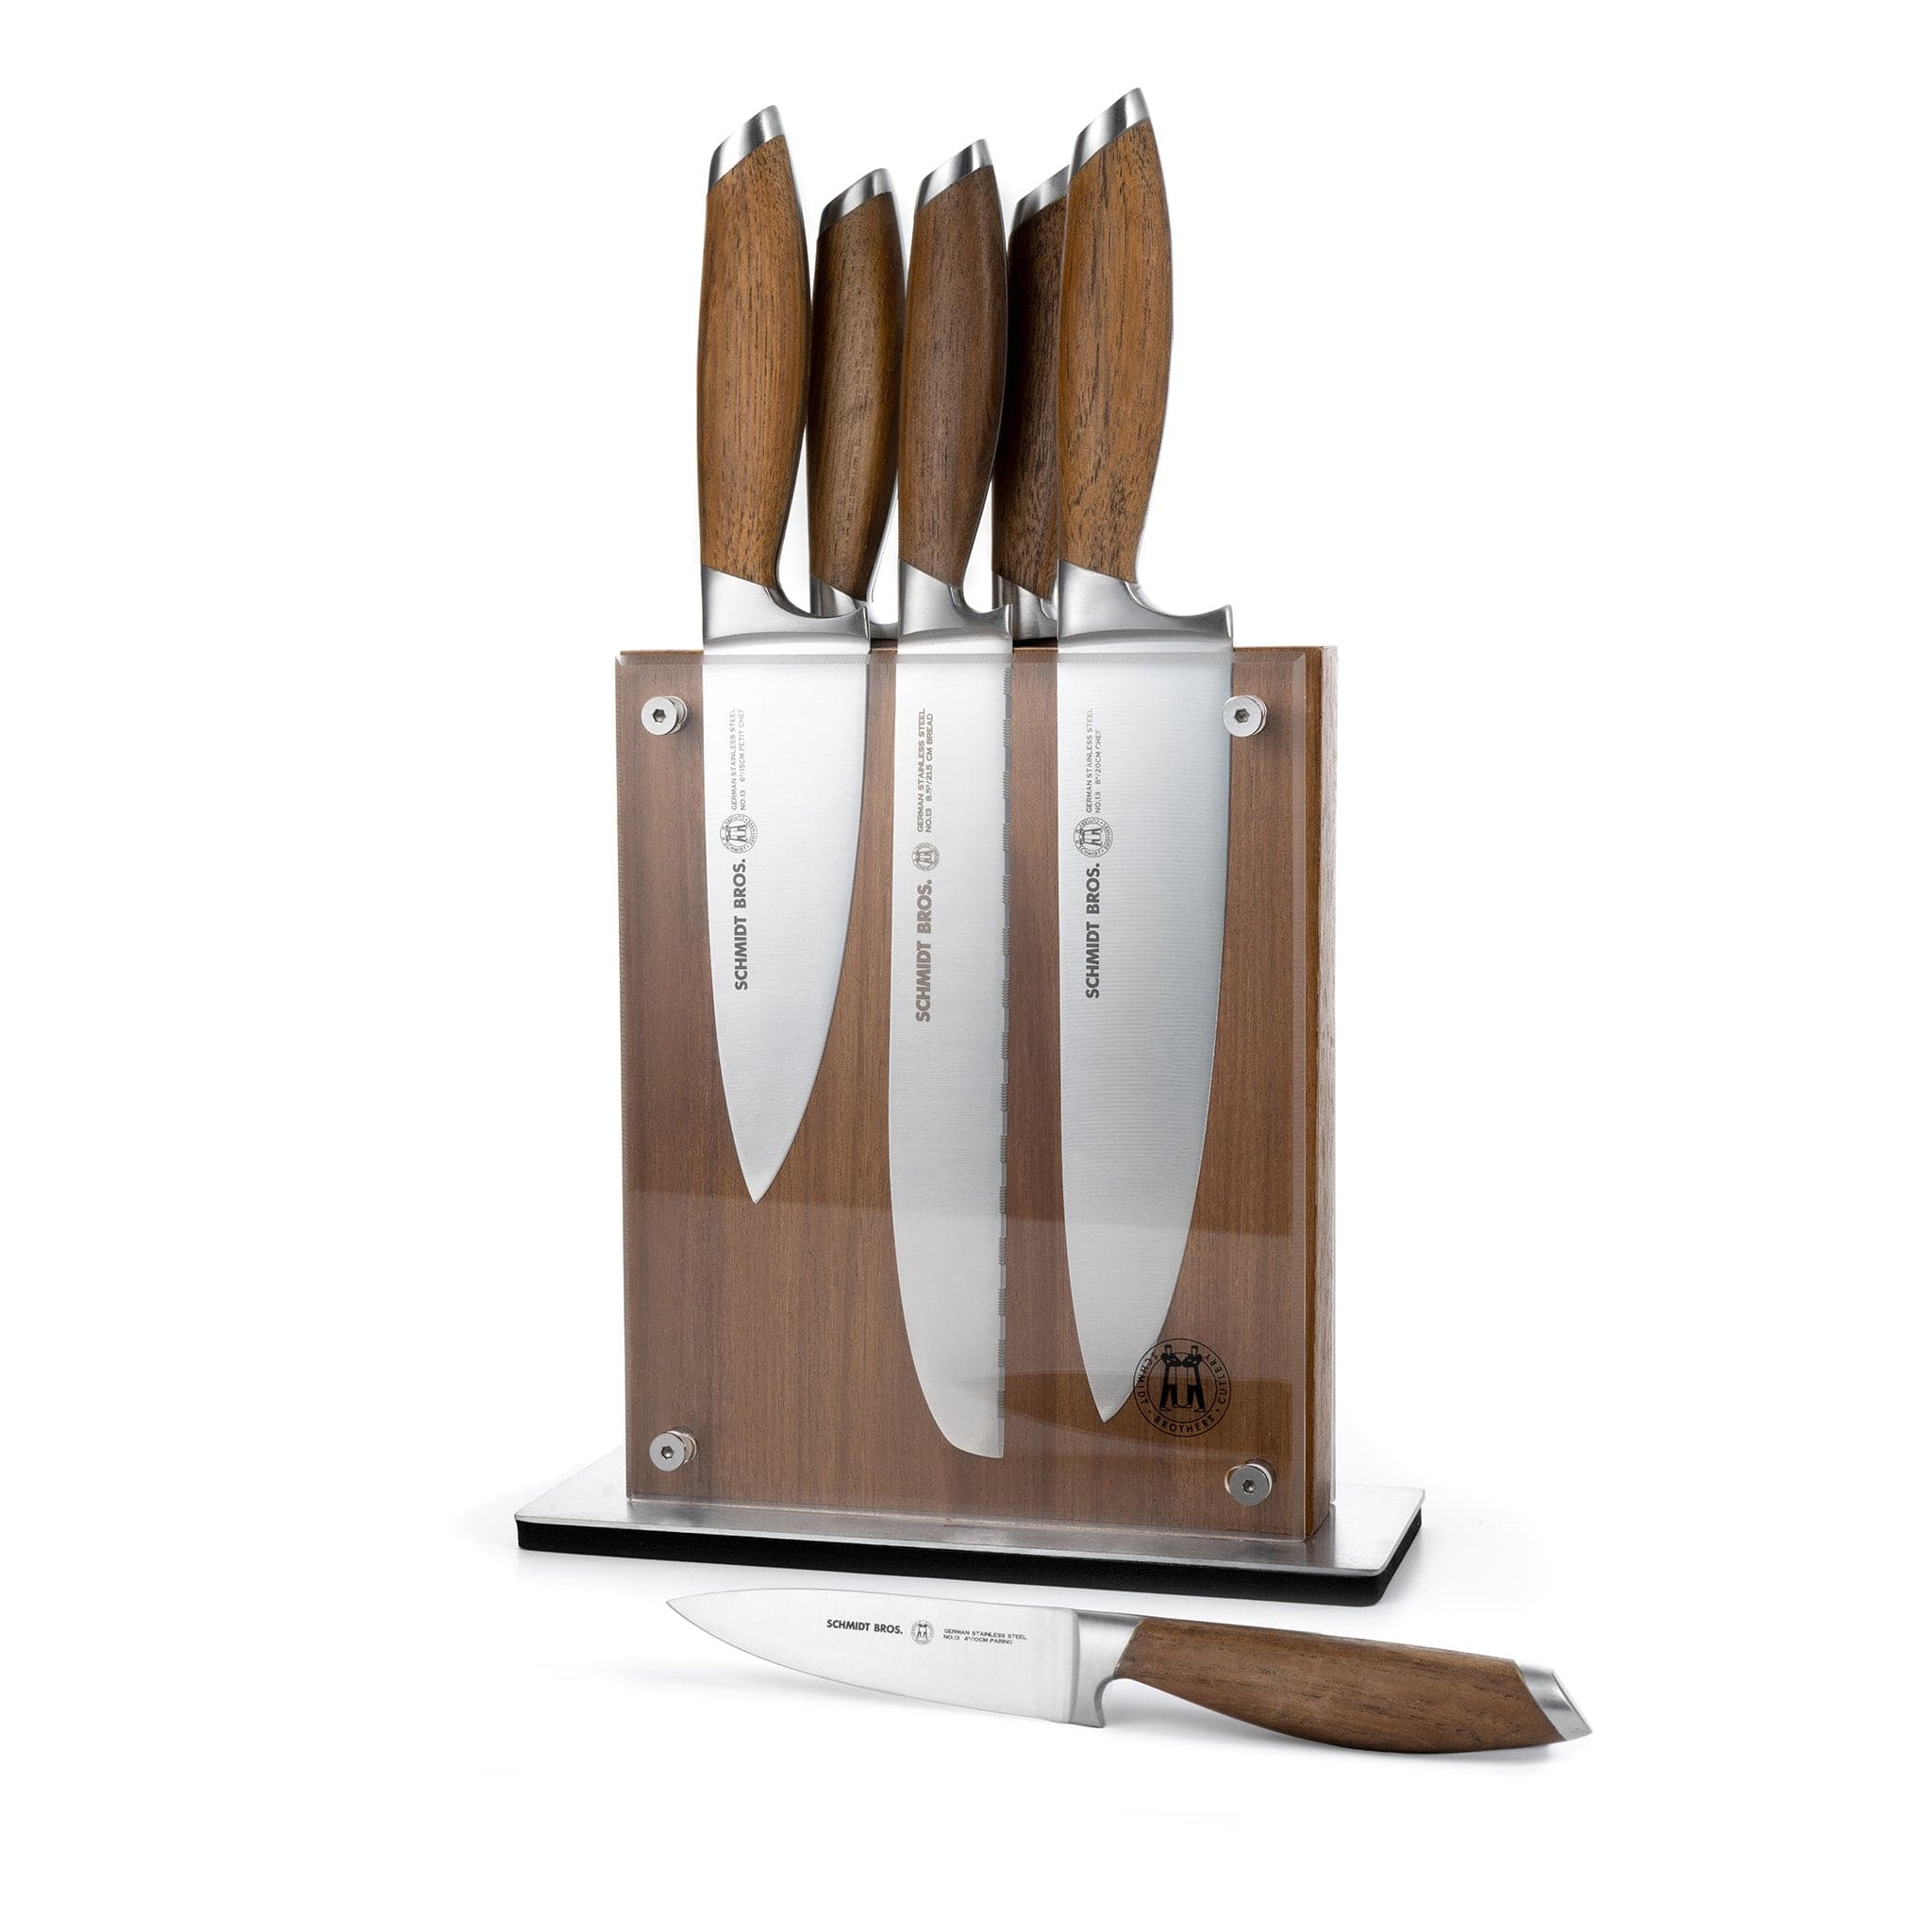 http://schmidtbrothers.com/cdn/shop/files/schmidt-brothers-kitchen-cutlery-schmidt-brothers-bonded-teak-7-piece-knife-set-high-carbon-stainless-steel-cutlery-with-acacia-and-acrylic-magnetic-knife-block-30743406936125.jpg?v=1684152455